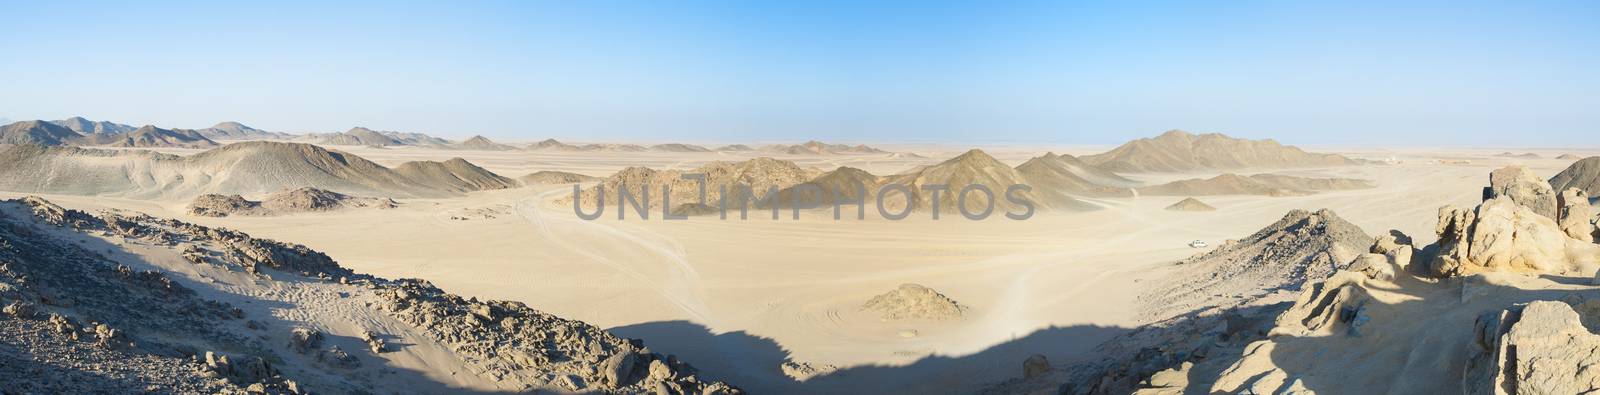 Panoramic view of a rocky desert landscape in africa with mountains